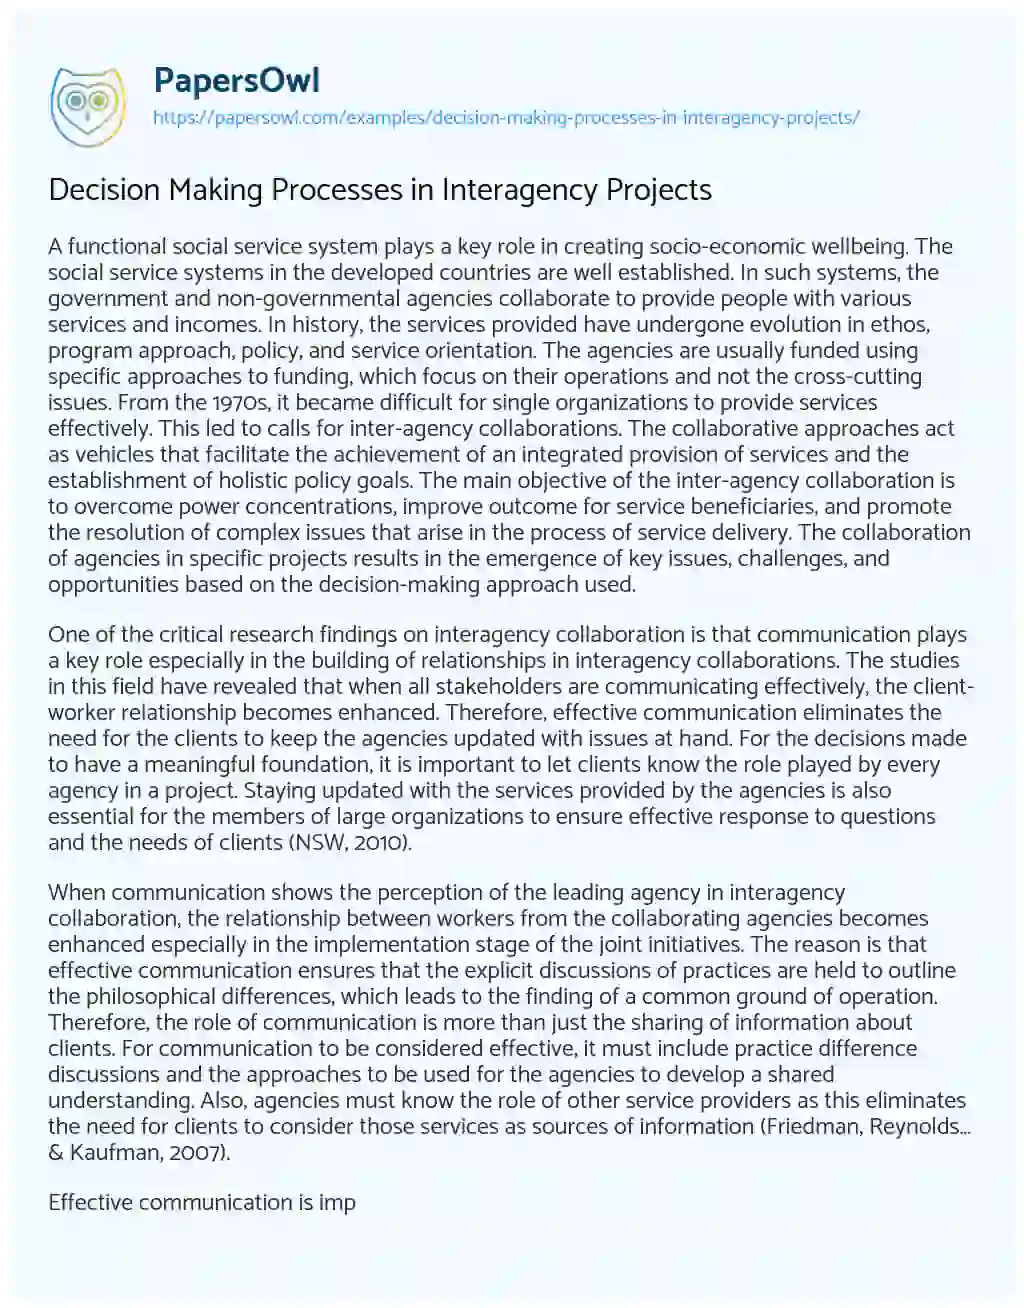 Decision Making Processes in Interagency Projects essay